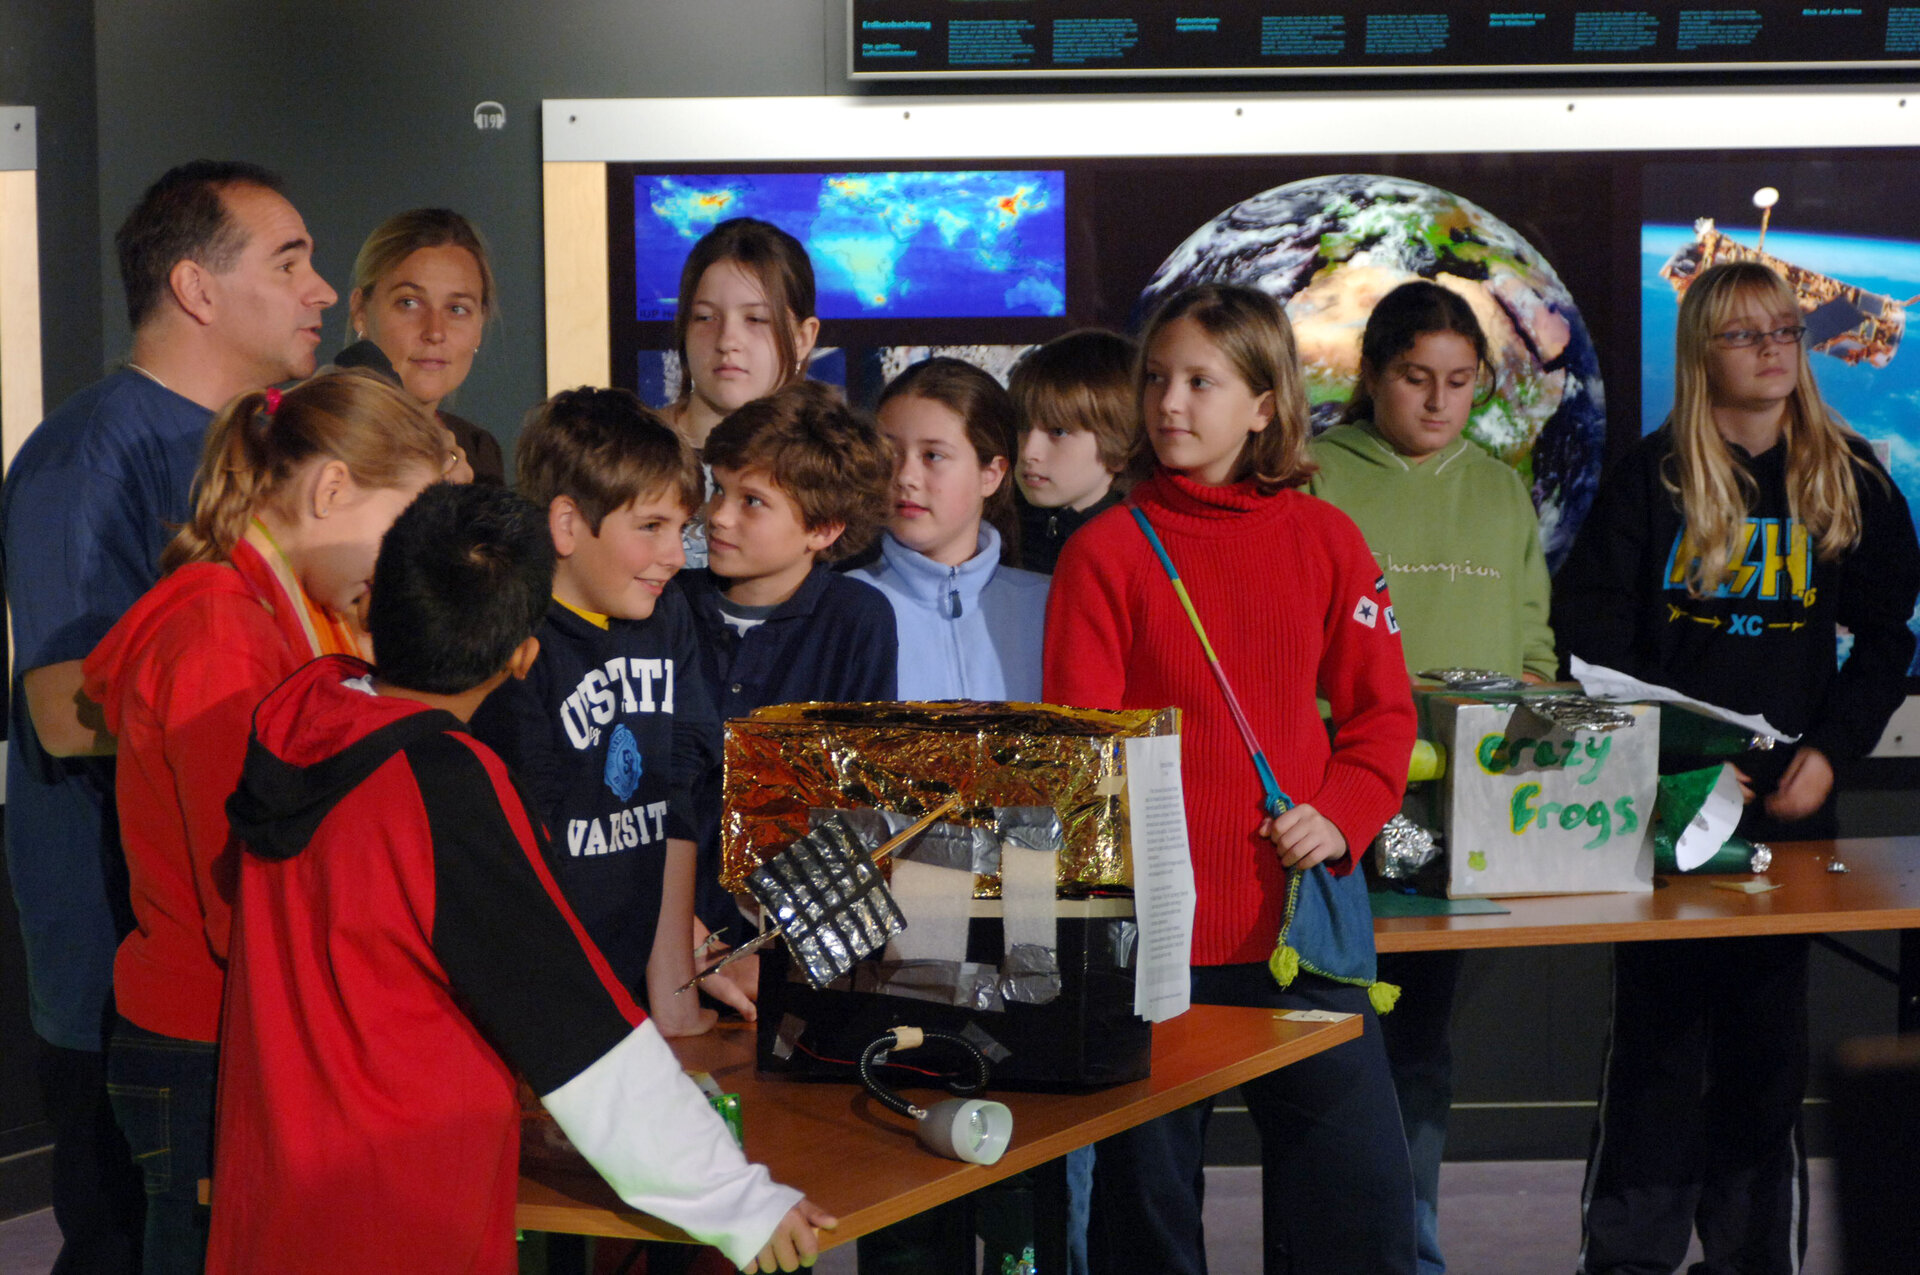 Philippe Willekens speaks to the pupils at Space Expo